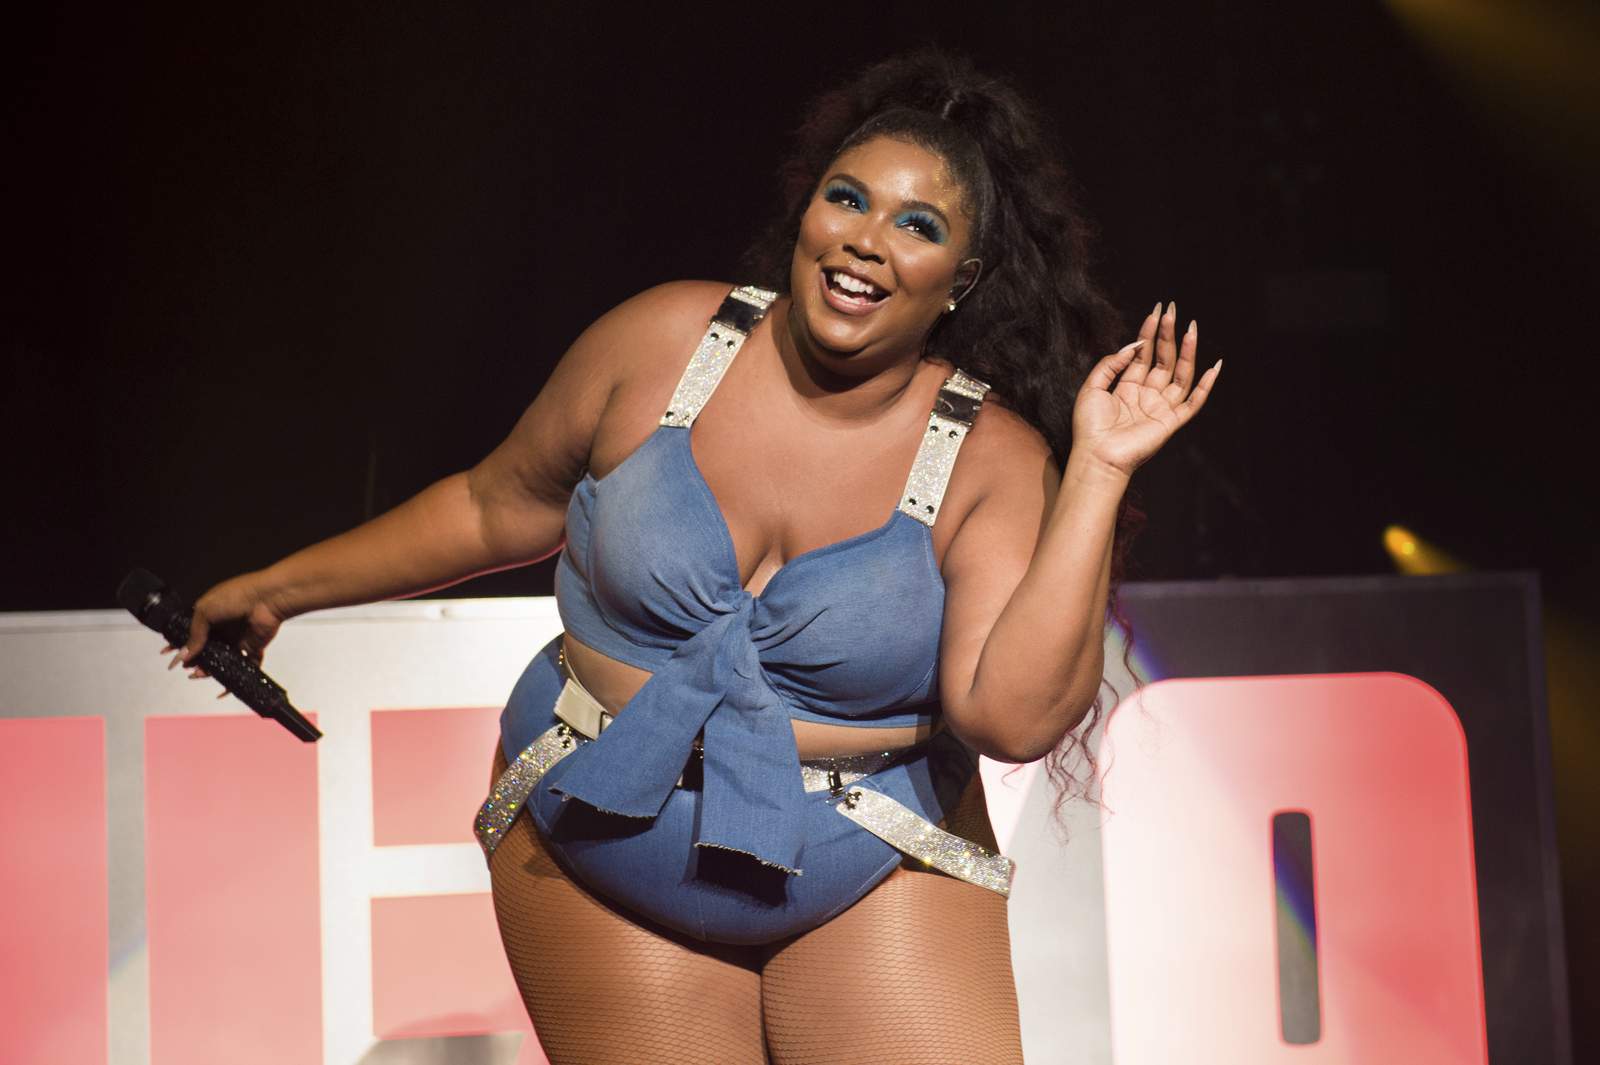 Here’s how you can watch Lizzo and your favorite stars perform tonight during One World: Together At Home